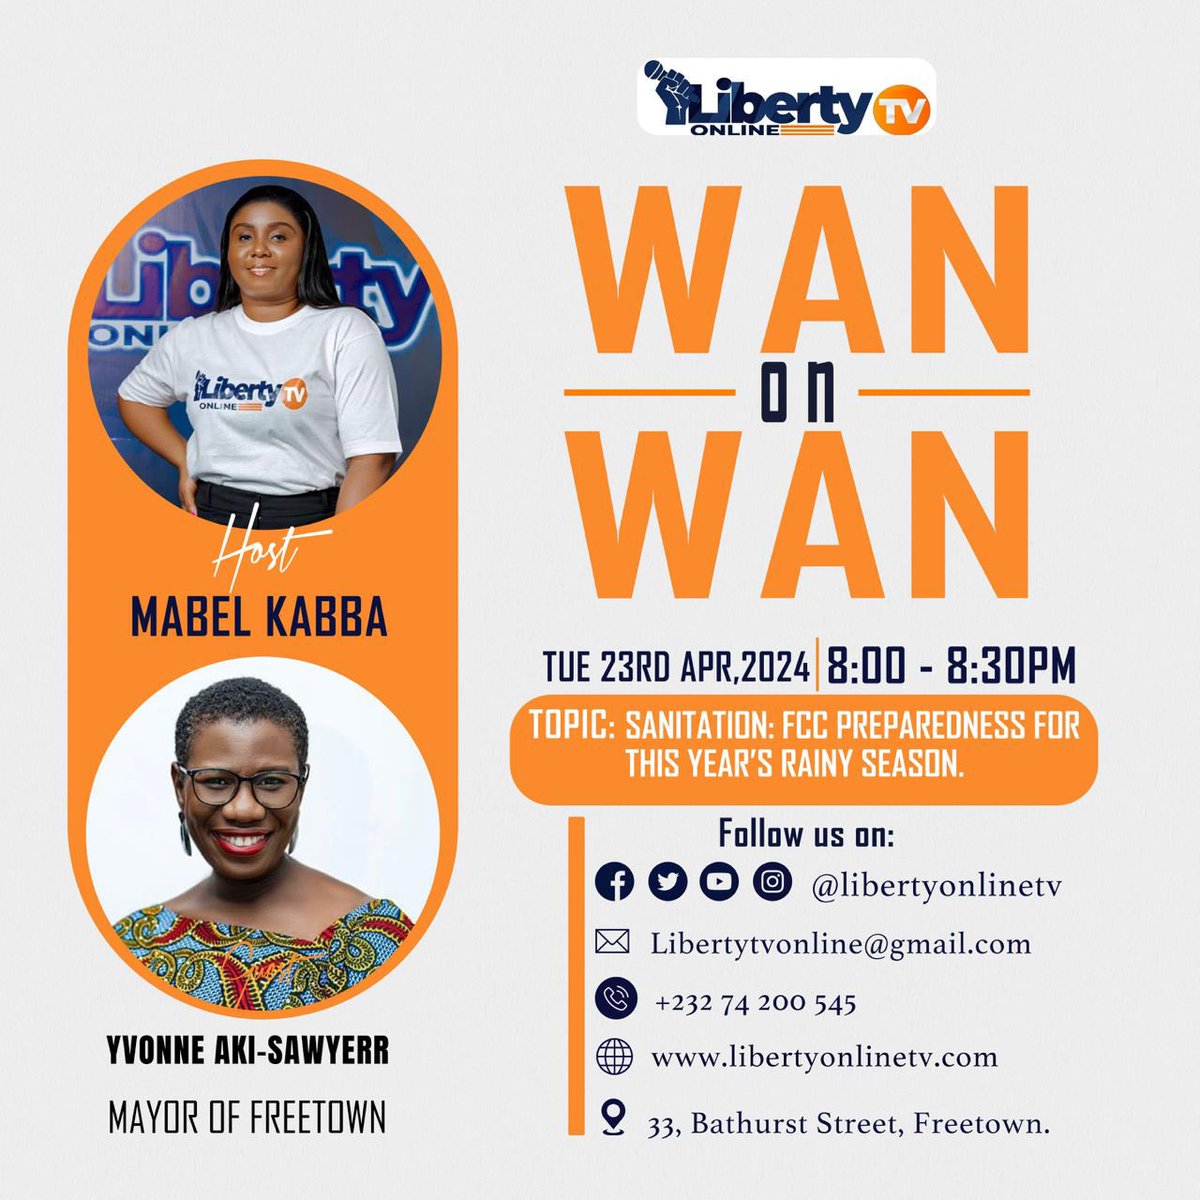 Tonight on the WAN on WAN program, we are pleased to have the Mayor of Freetown, Yvonne Aki-Sawyer @yakisawyerr , joining us to discuss the Freetown City Council’s @FCC_Freetown readiness for sanitation ahead of this year’s rainy season. #libertyonlinetv #SaloneX